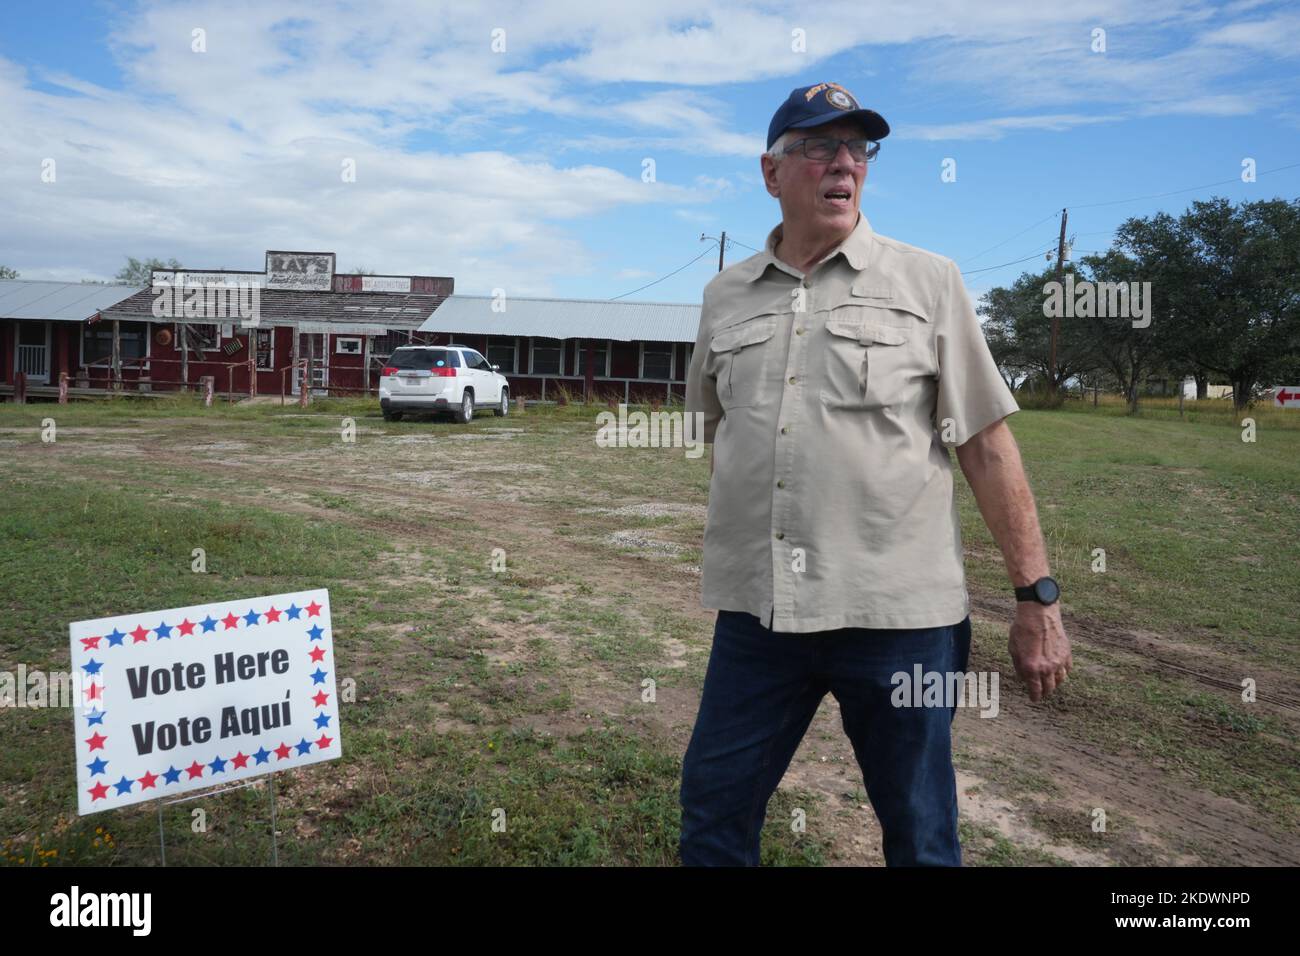 Live Oak County Texas USA< November 8 2022: Election Judge PHILLIP STORM waits outside the old barbecue joint Ray's outside of Alice, Texas, for voters to arrive during the midterm elections in rural south Texas. The business has been closed about 15 years and is used regularly as a rural polling place. Credit: Bob Daemmrich/Alamy Live News Stock Photo